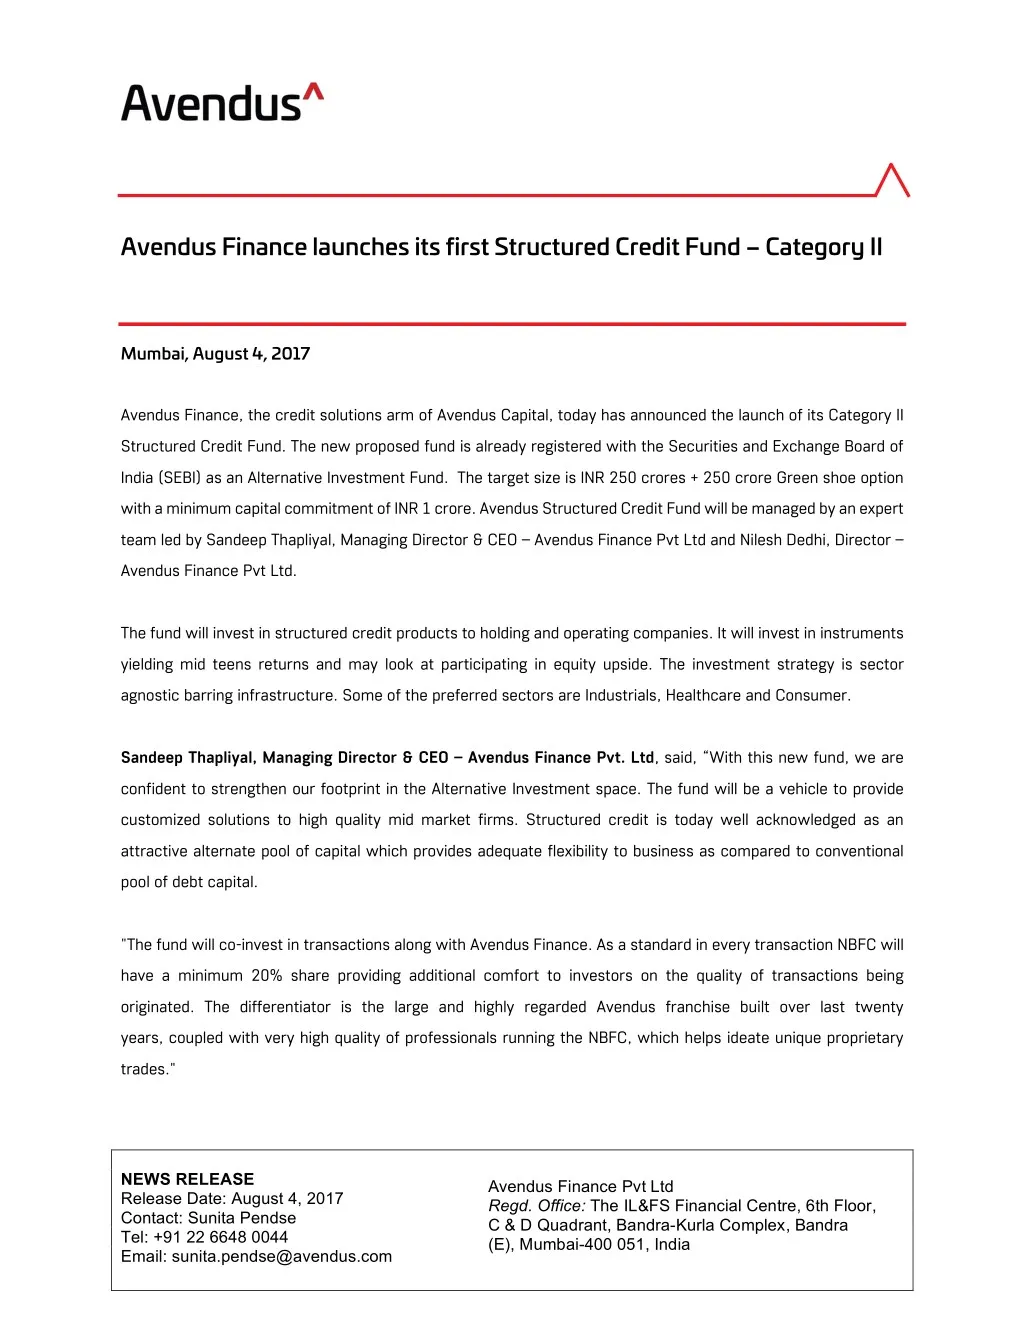 avendus finance launches its first structured